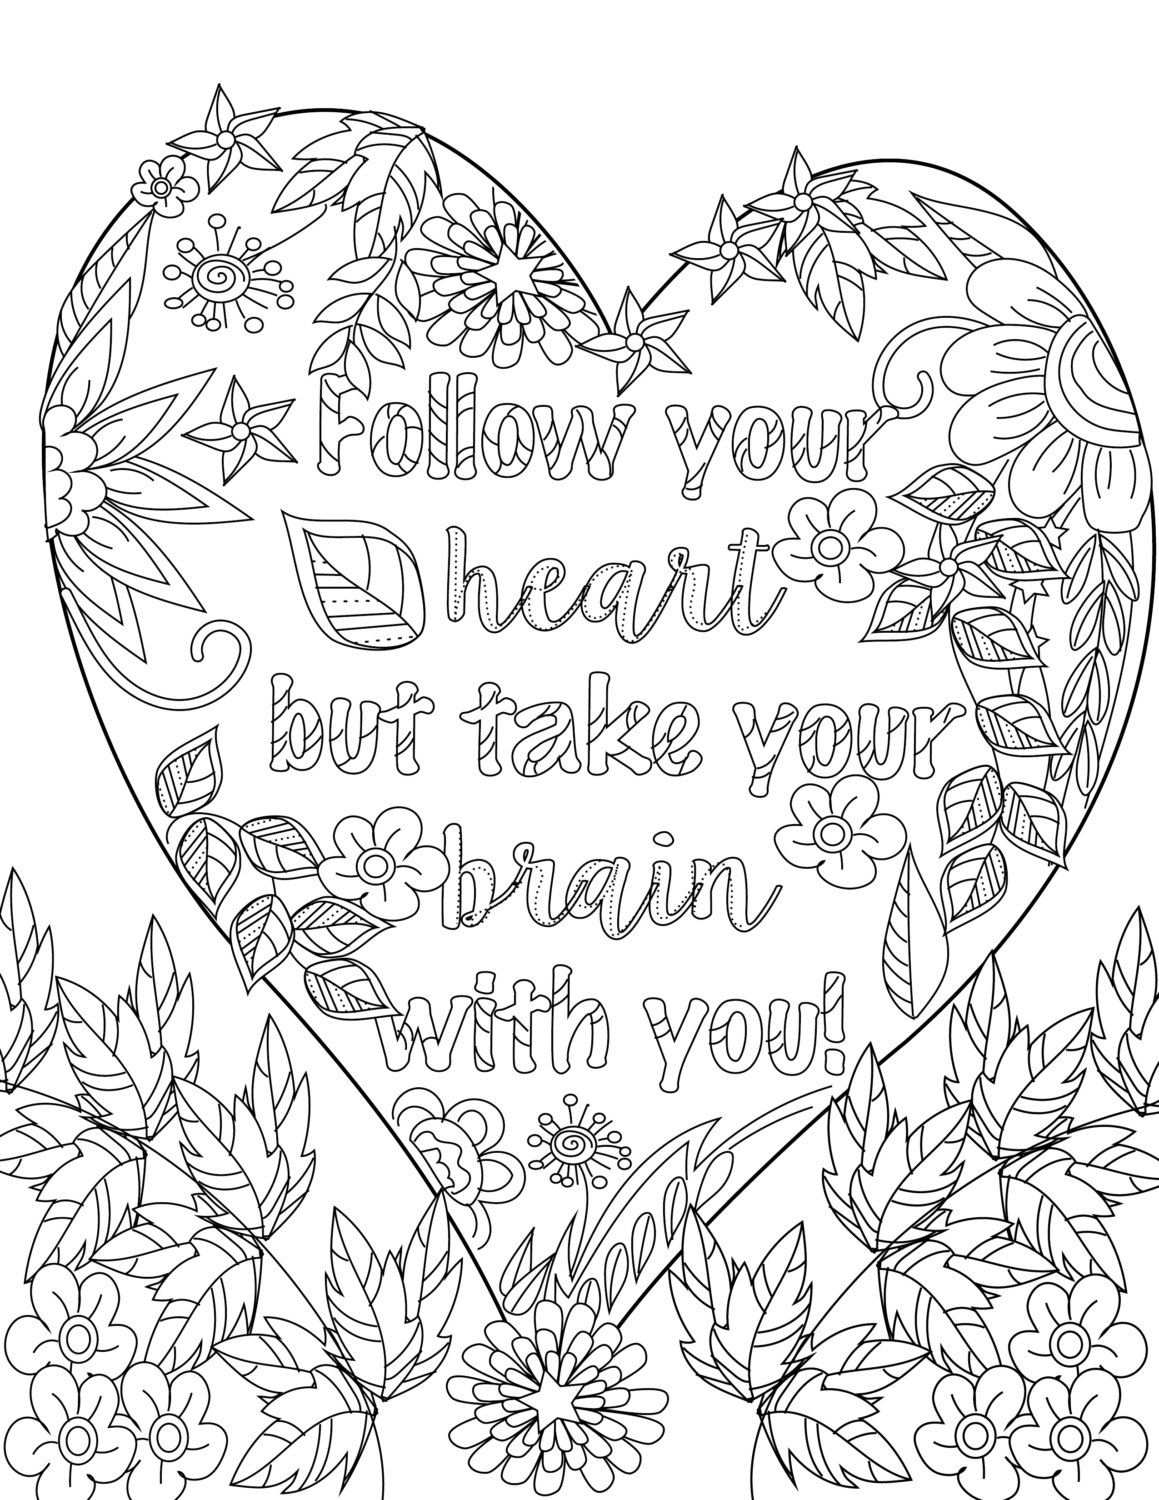 Inspirational Quotes A Positive Uplifting Adult Coloring Book